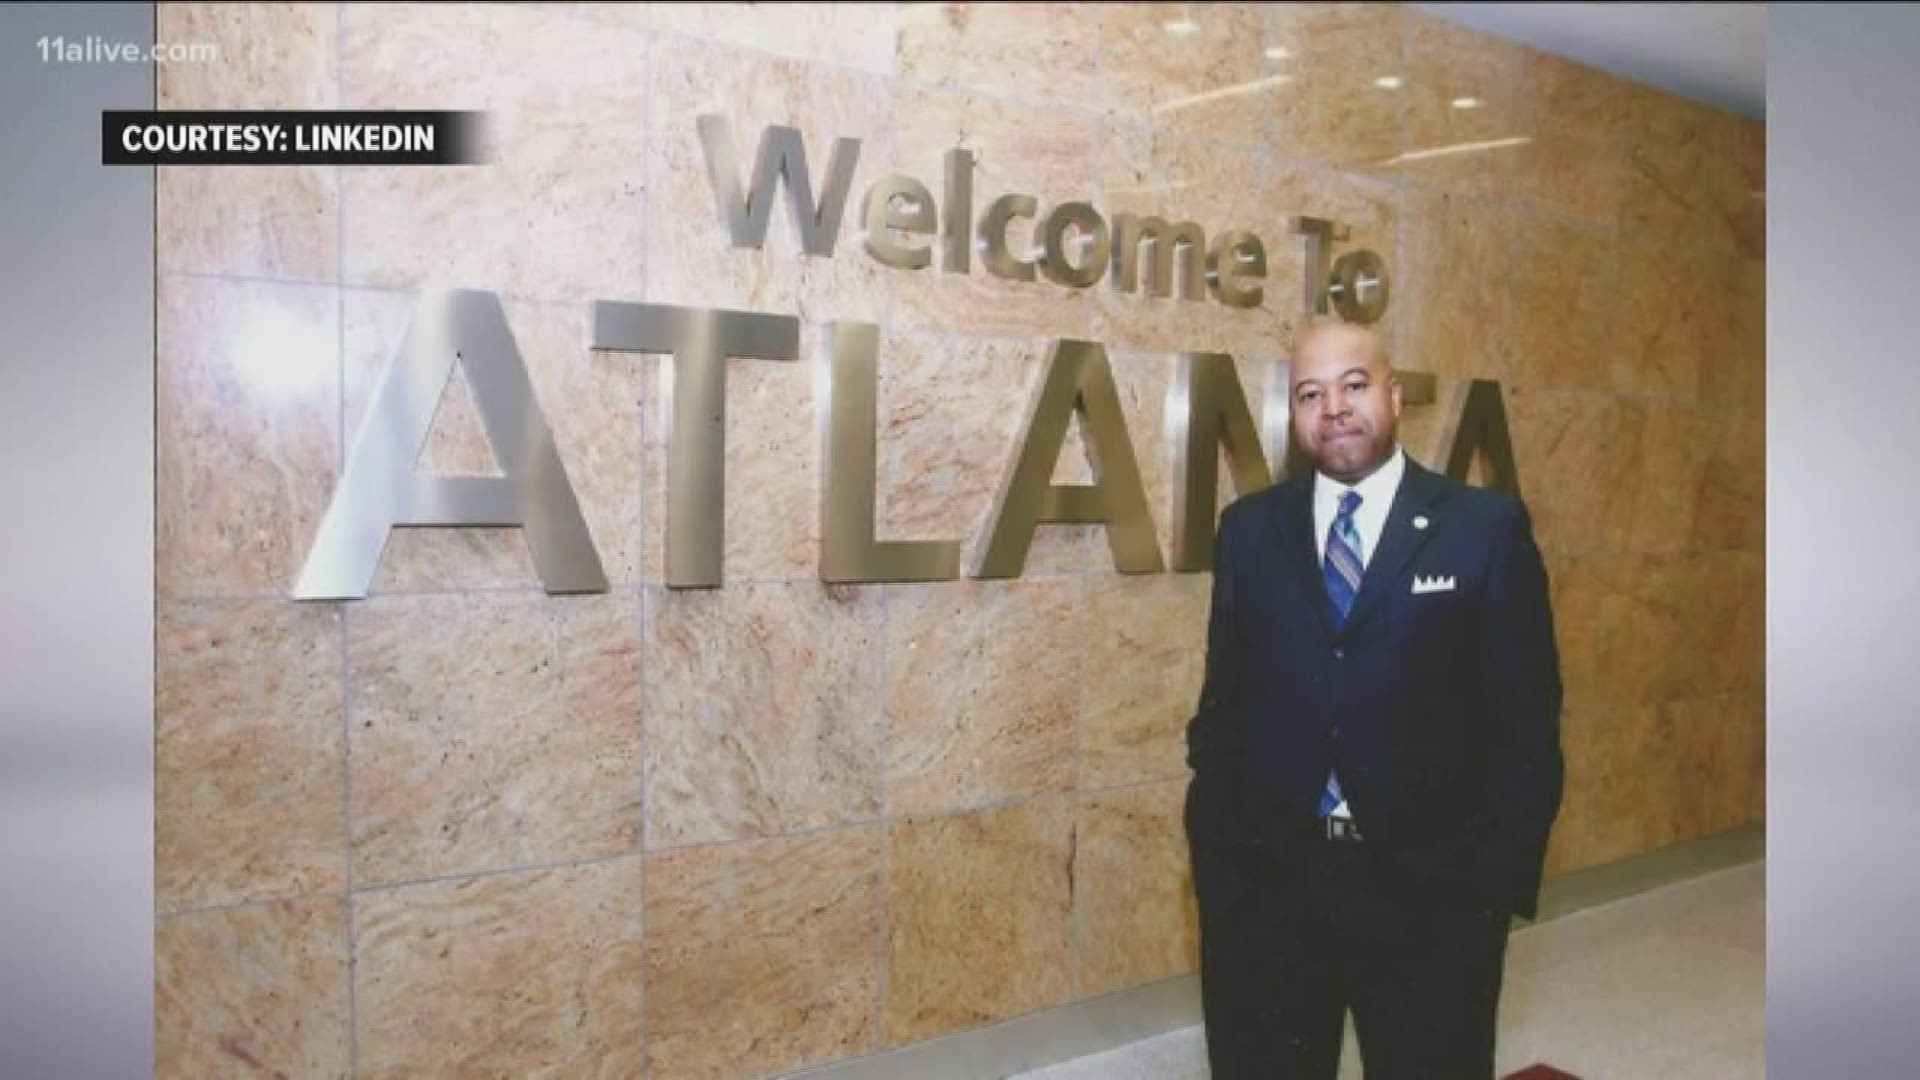 It's a part of the ongoing bribery scandal in the Atlanta city government.